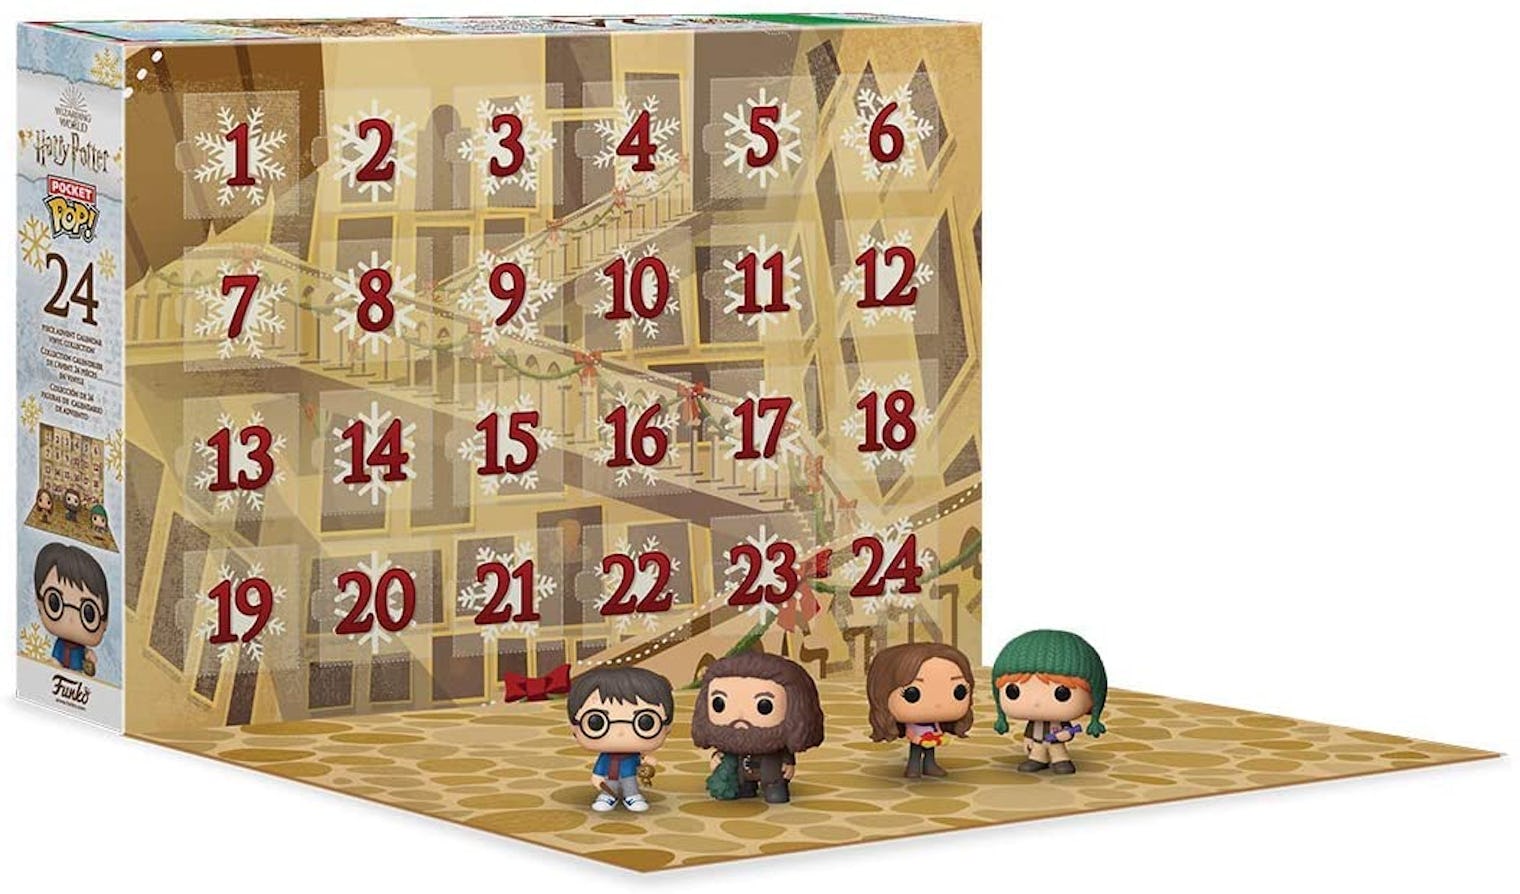 funko-pop-s-harry-potter-advent-calendar-will-make-your-holidays-magical